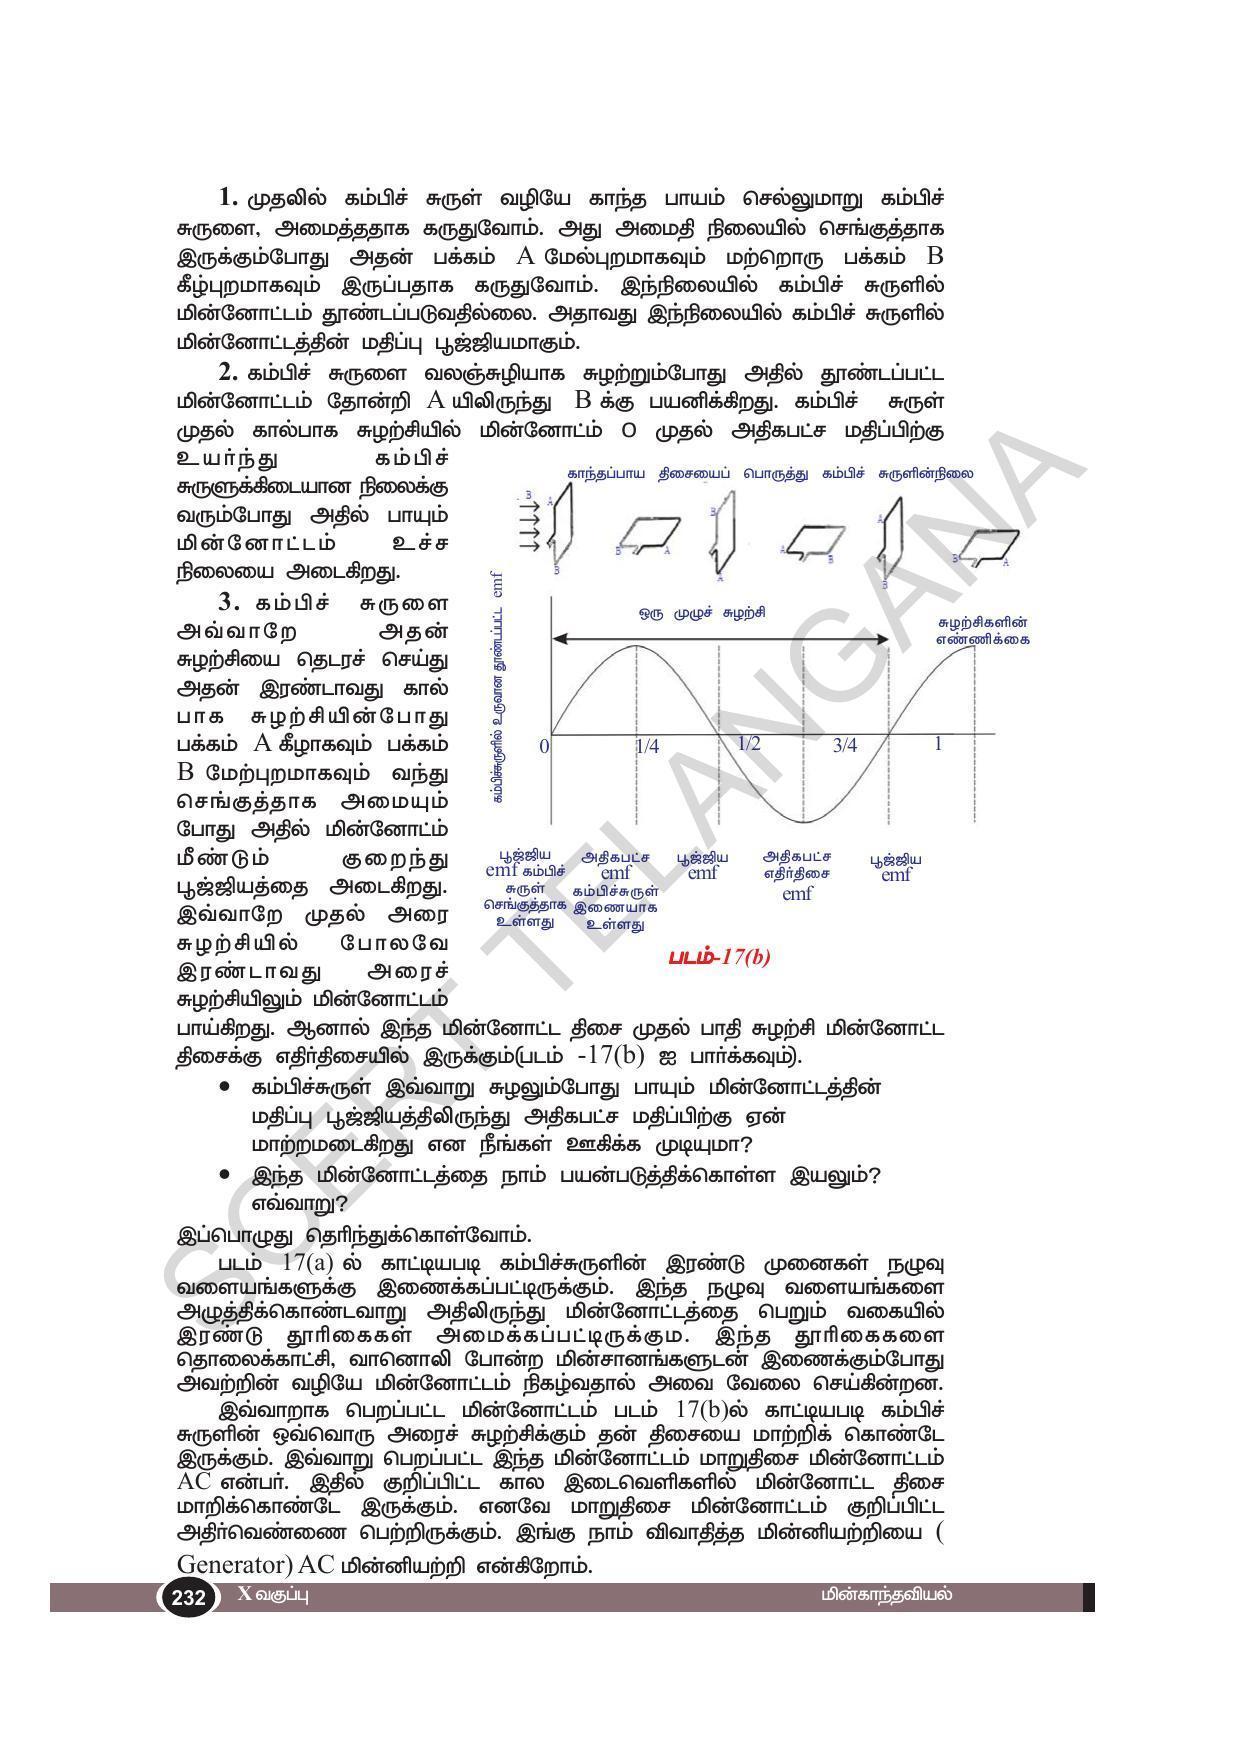 TS SCERT Class 10 Physical Science(Tamil Medium) Text Book - Page 244